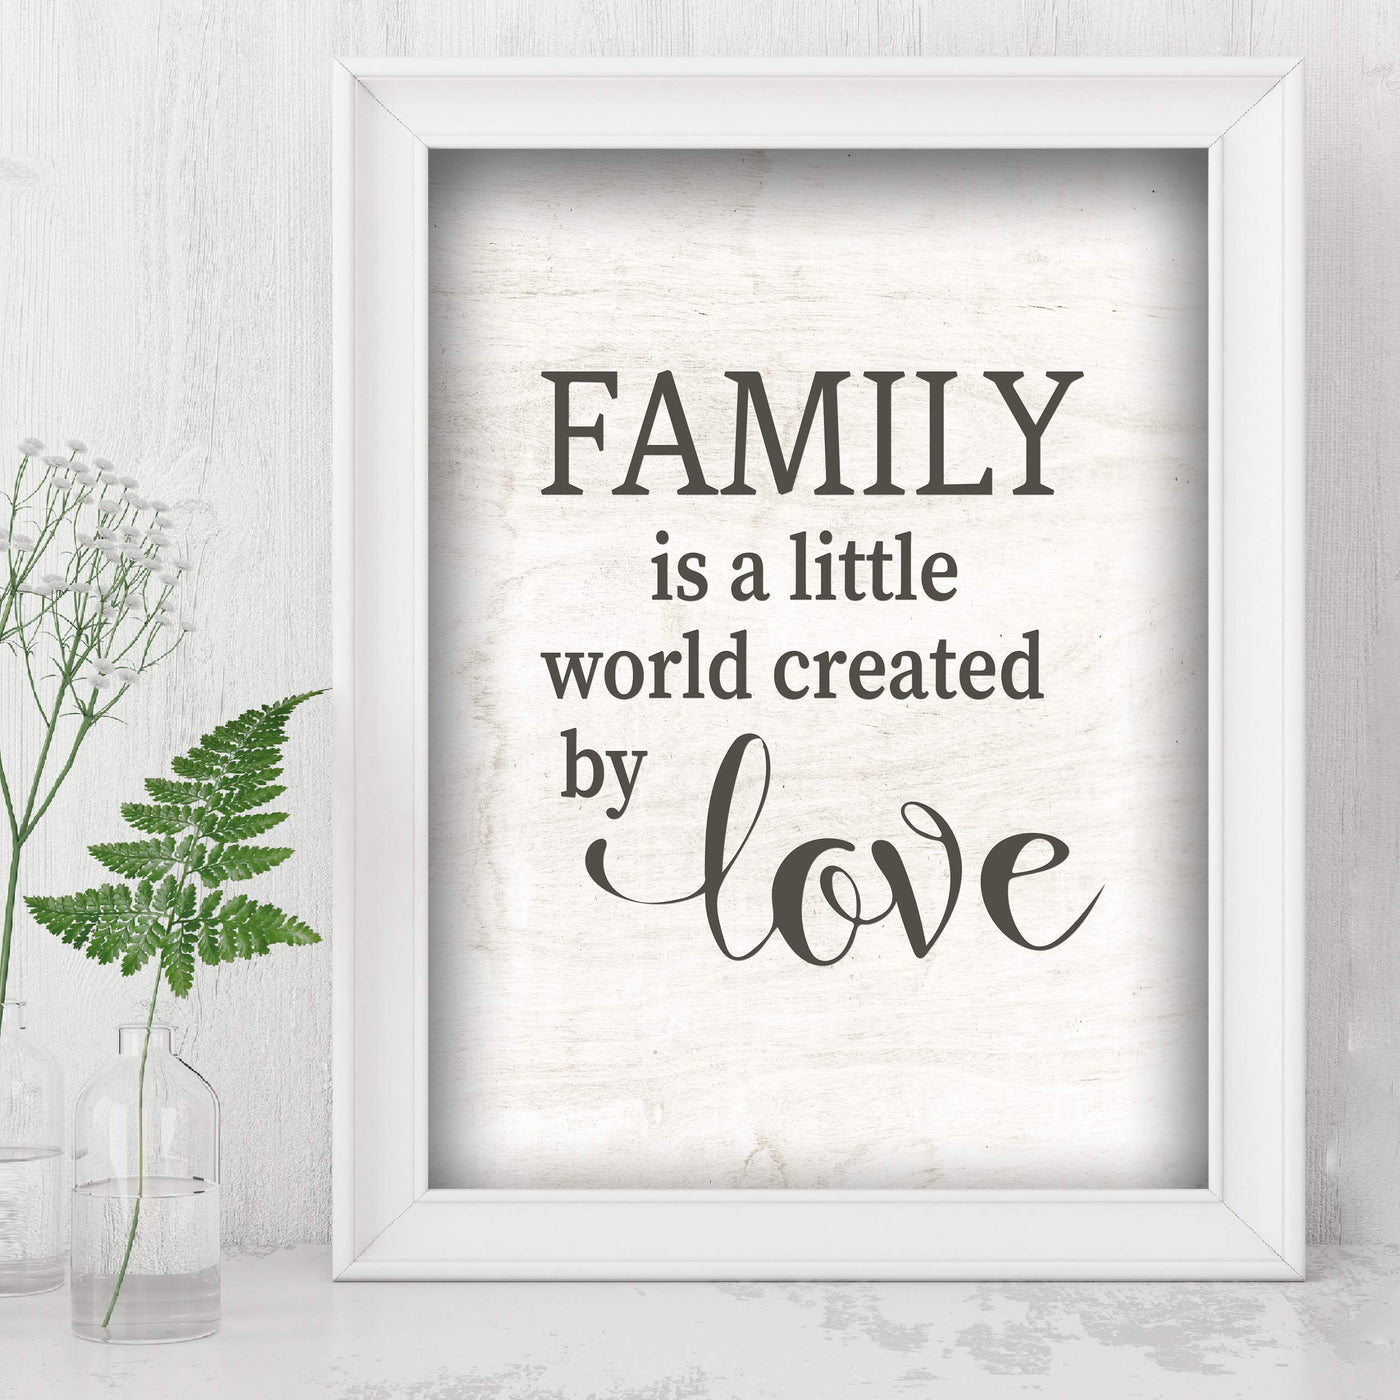 Family Is A Little World Created By Love Inspirational Wall Sign -8 x 10" Rustic Typographic Art Print w/Replica Wood Design-Ready to Frame. Loving Decor for Home-Office-Farmhouse. Great Gift!